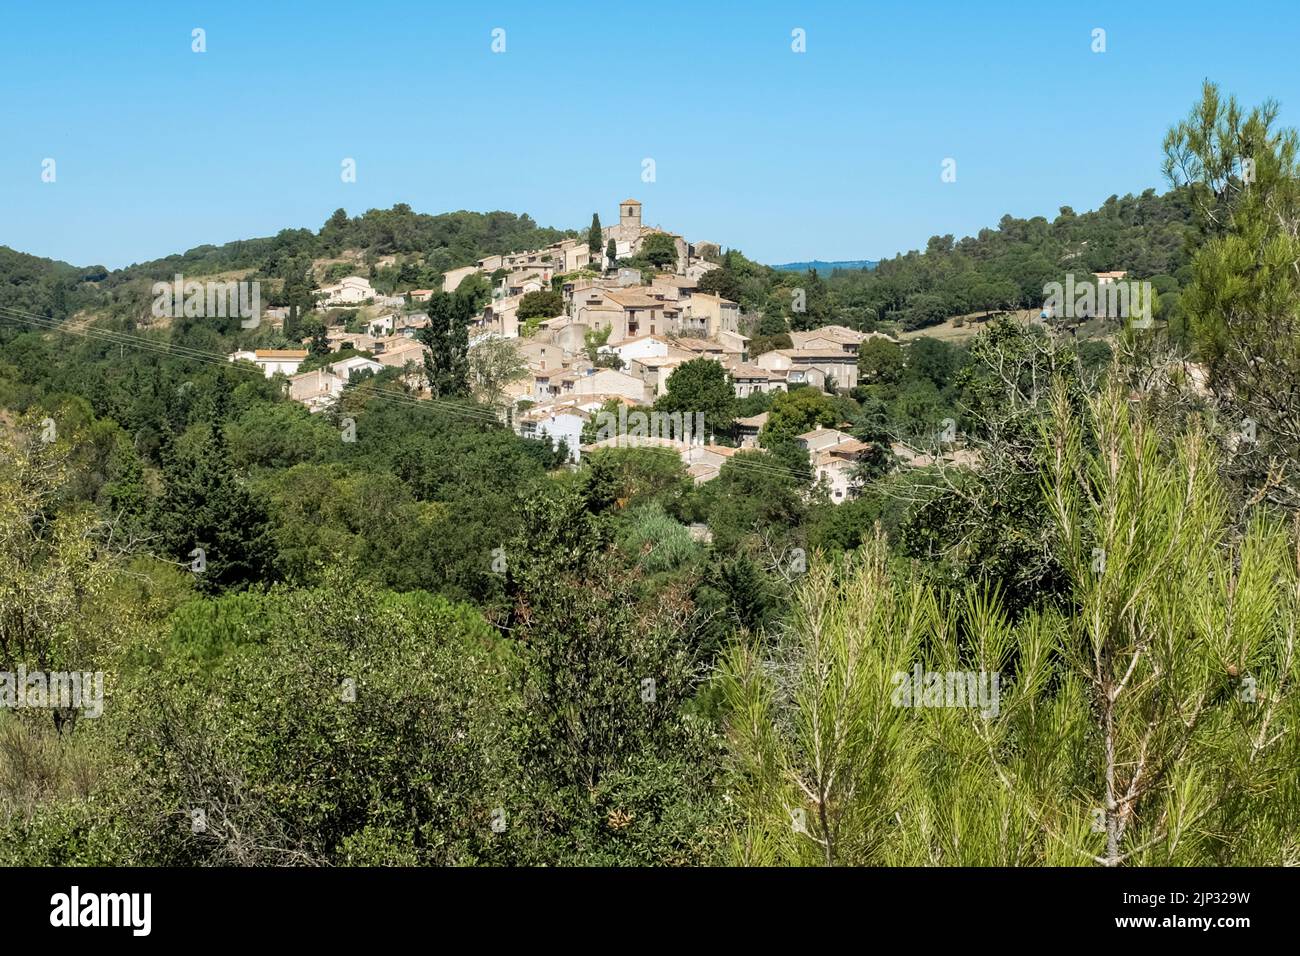 View of Aragon village near Carcassonne in Southern France. Stock Photo